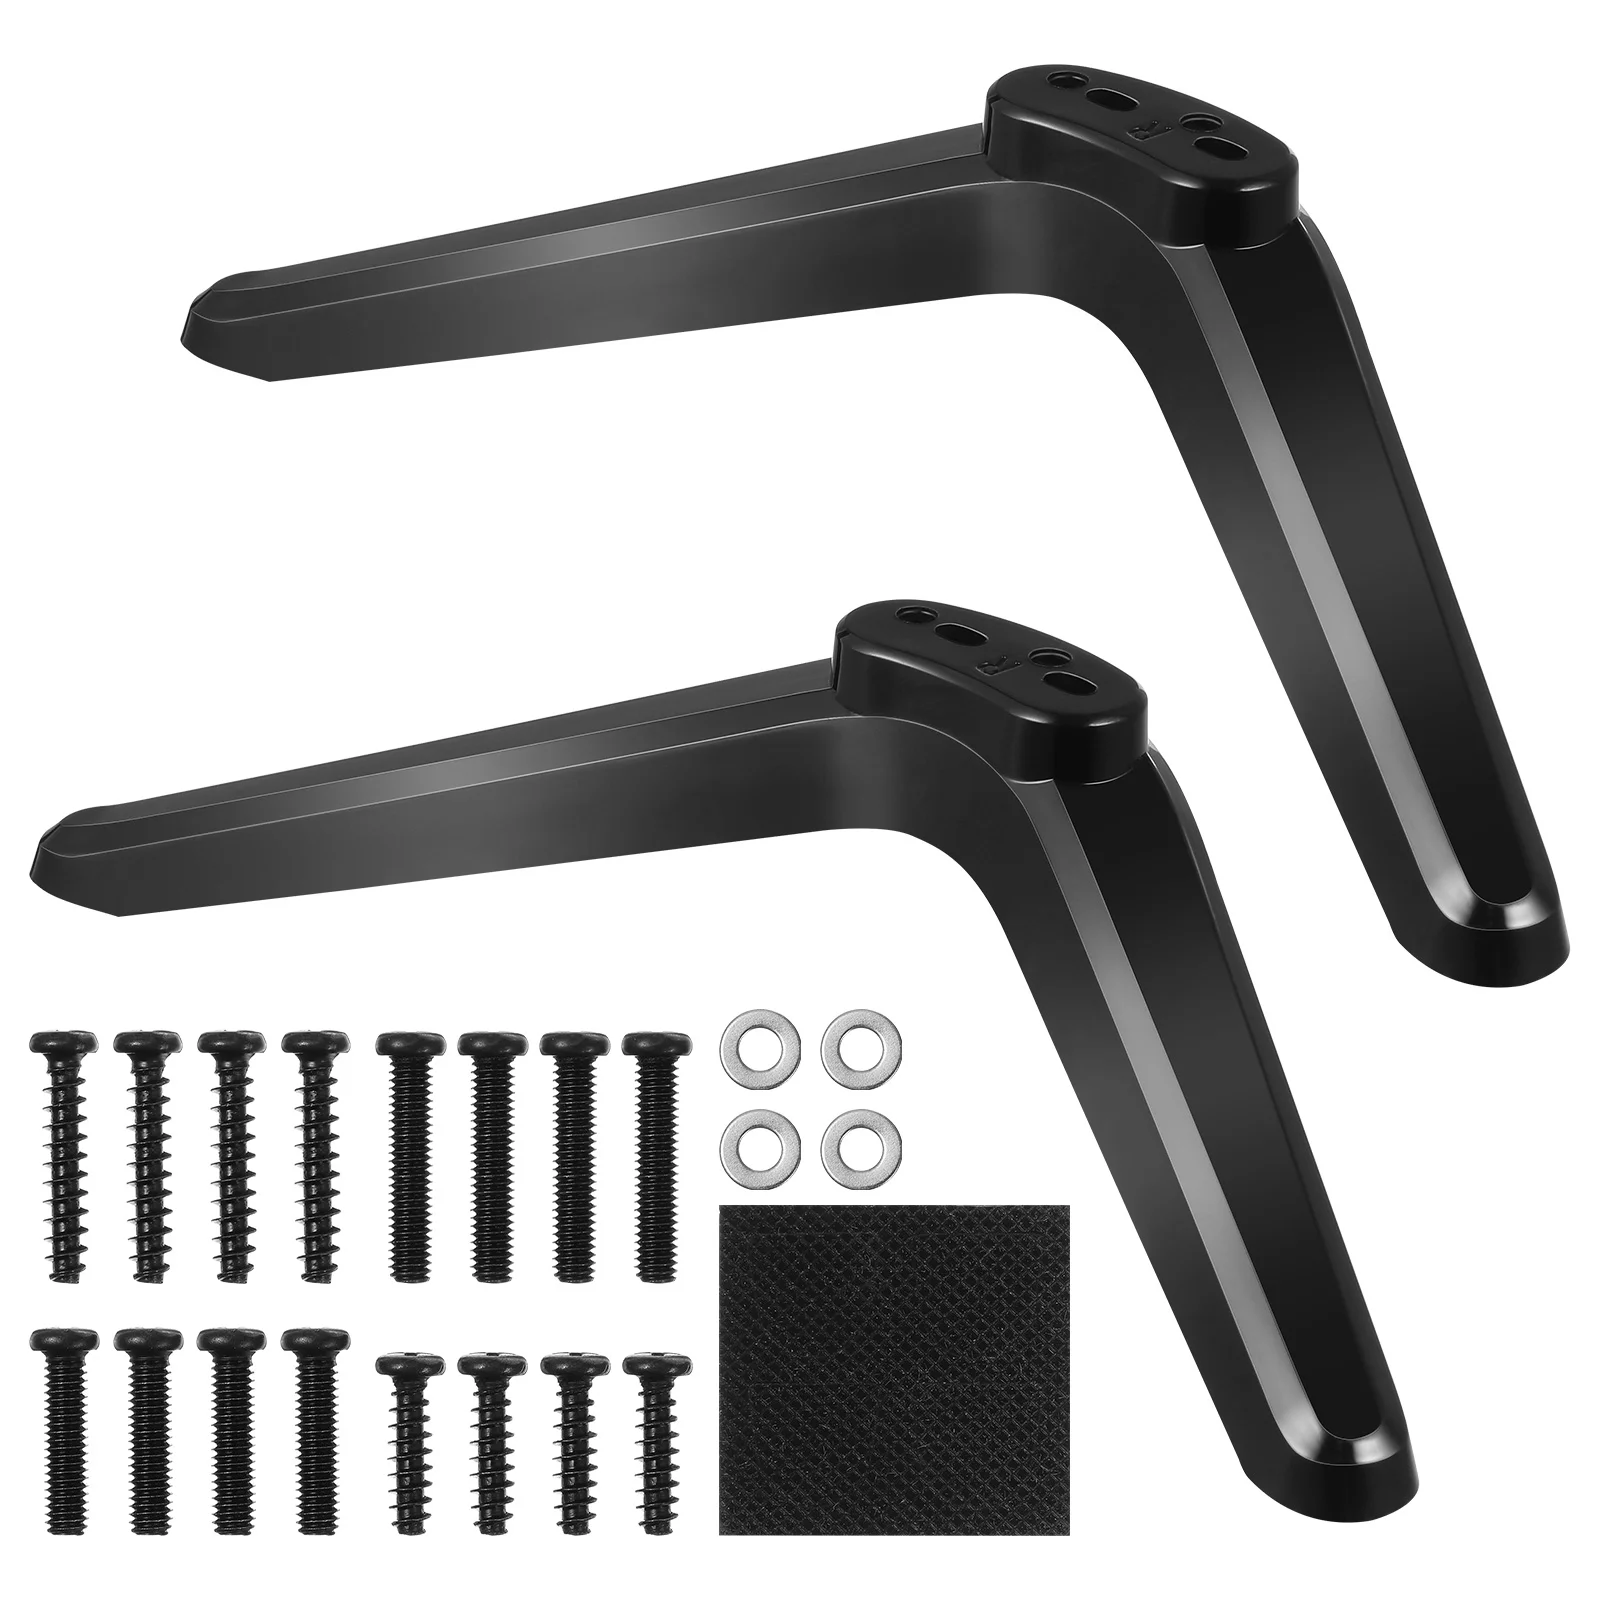 

2 Pcs Brackets Universal Stand Base Holder Mount Stands With Screws Monitor support